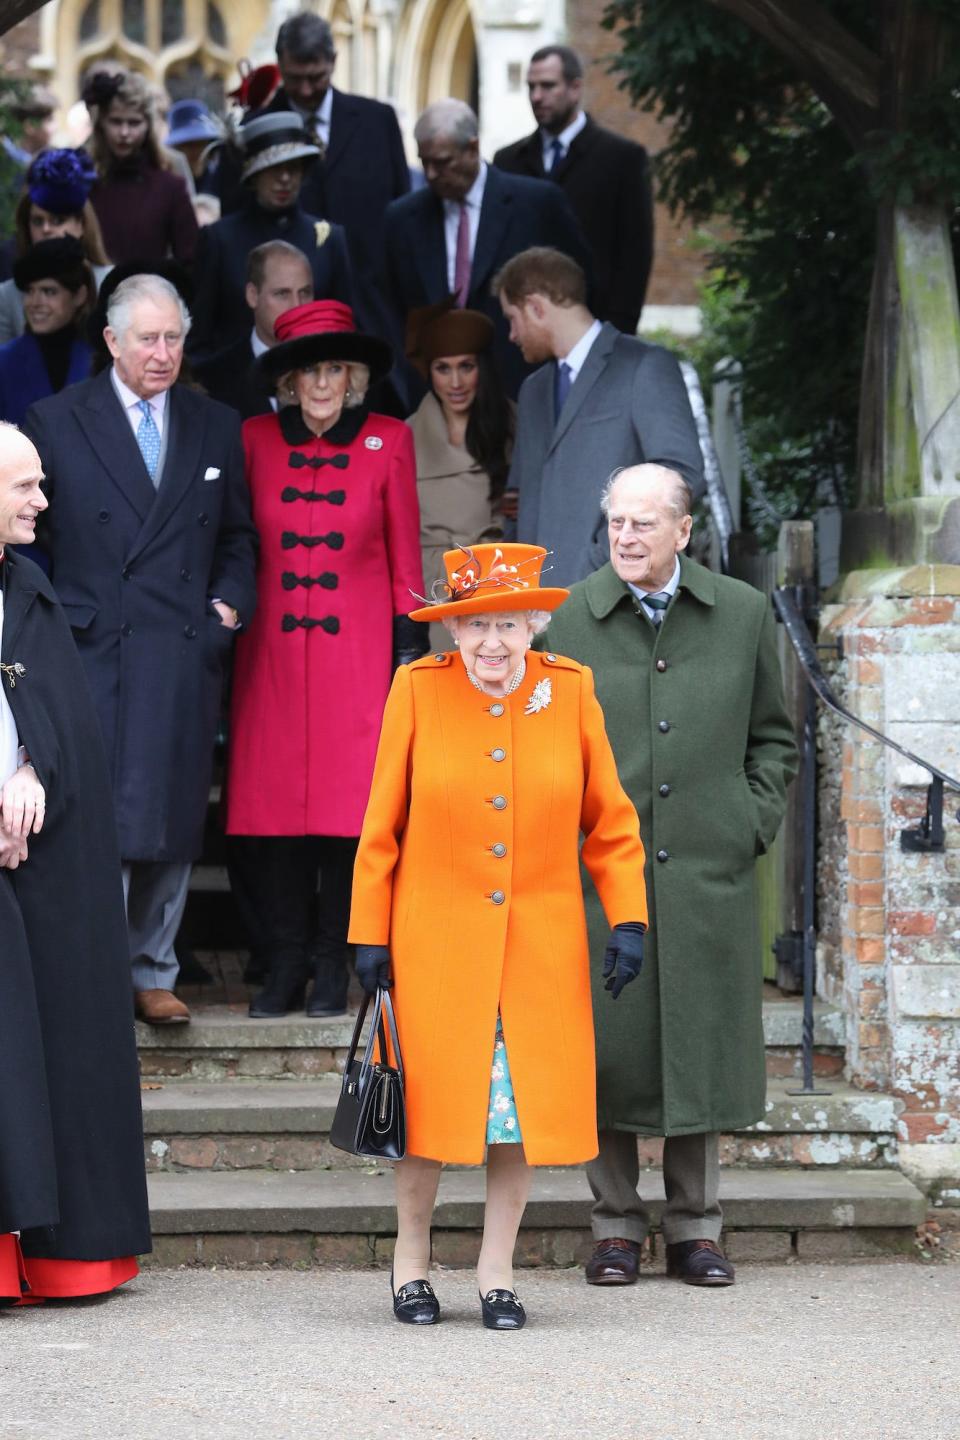 Members of the British royal family at a Christmas Day church service in 2017.